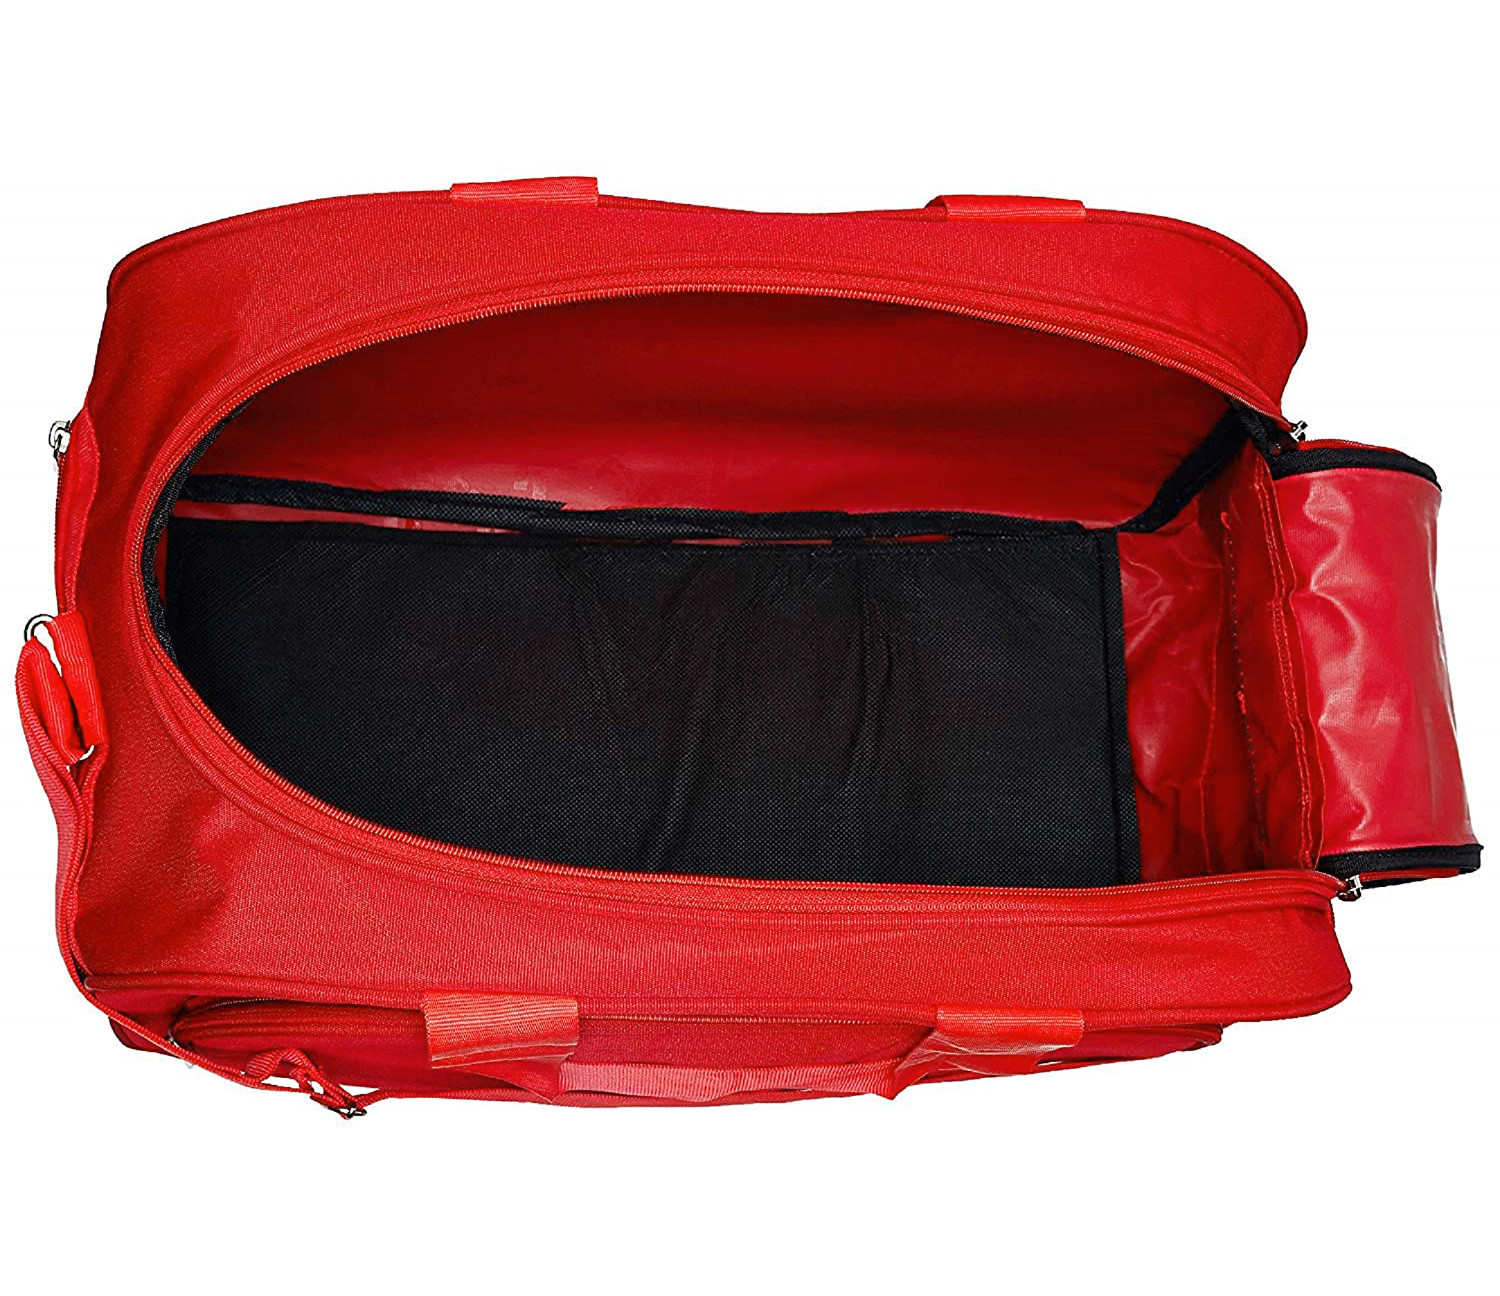 Kuber Industries Rexine Lightweight Travel Duffle Bag With Handle & 3 Outside Zipper Compartments,Large Capacity (Red)